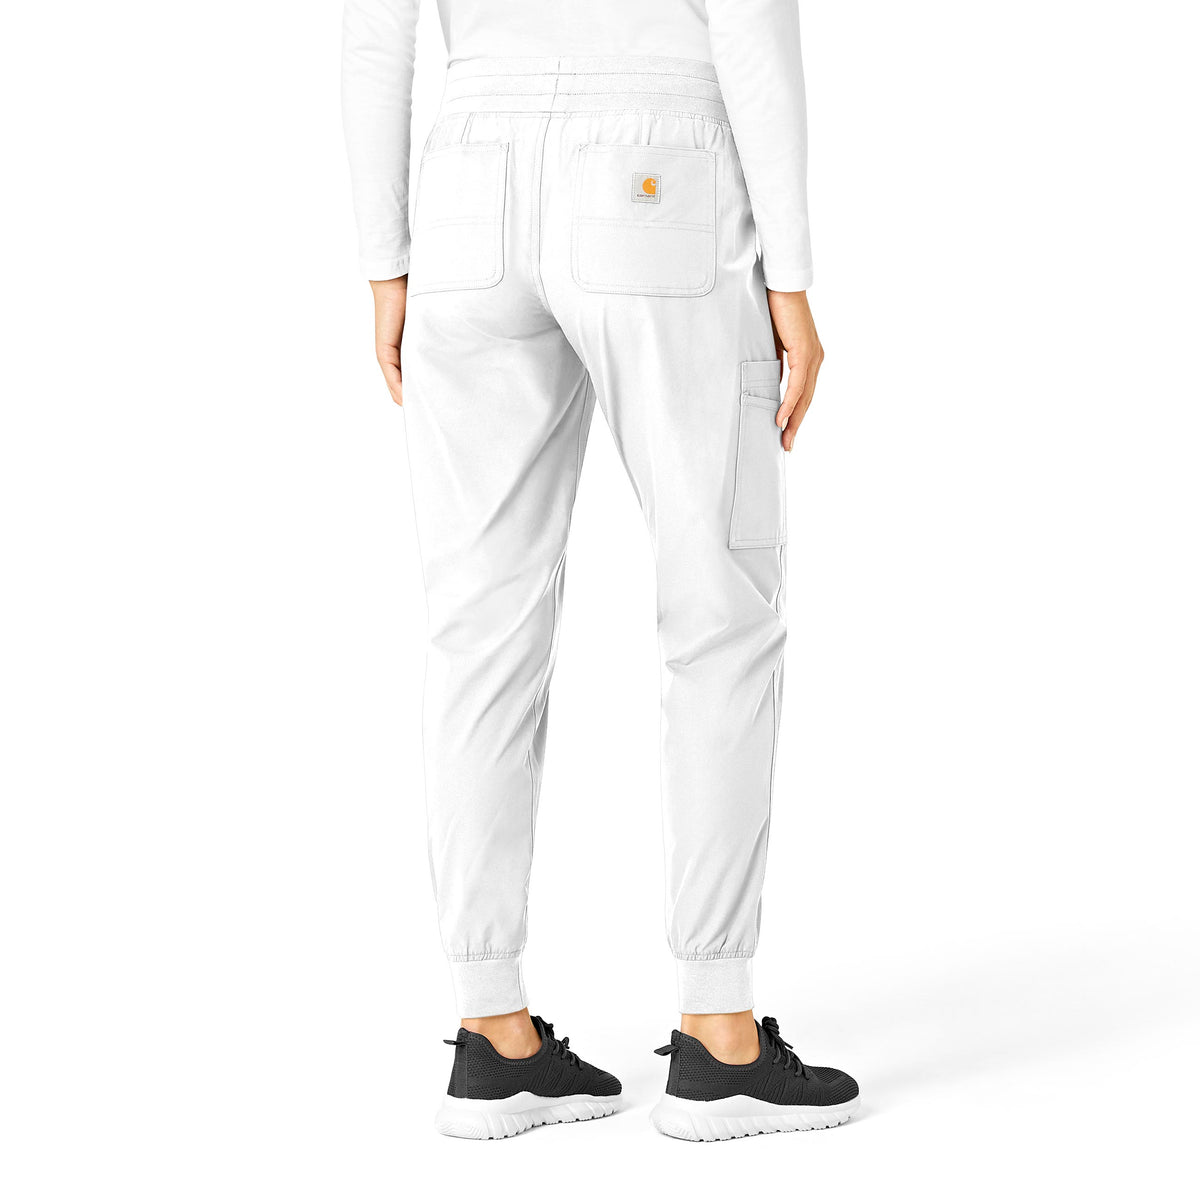 Force Essentials Women's Jogger Scrub Pant White back view